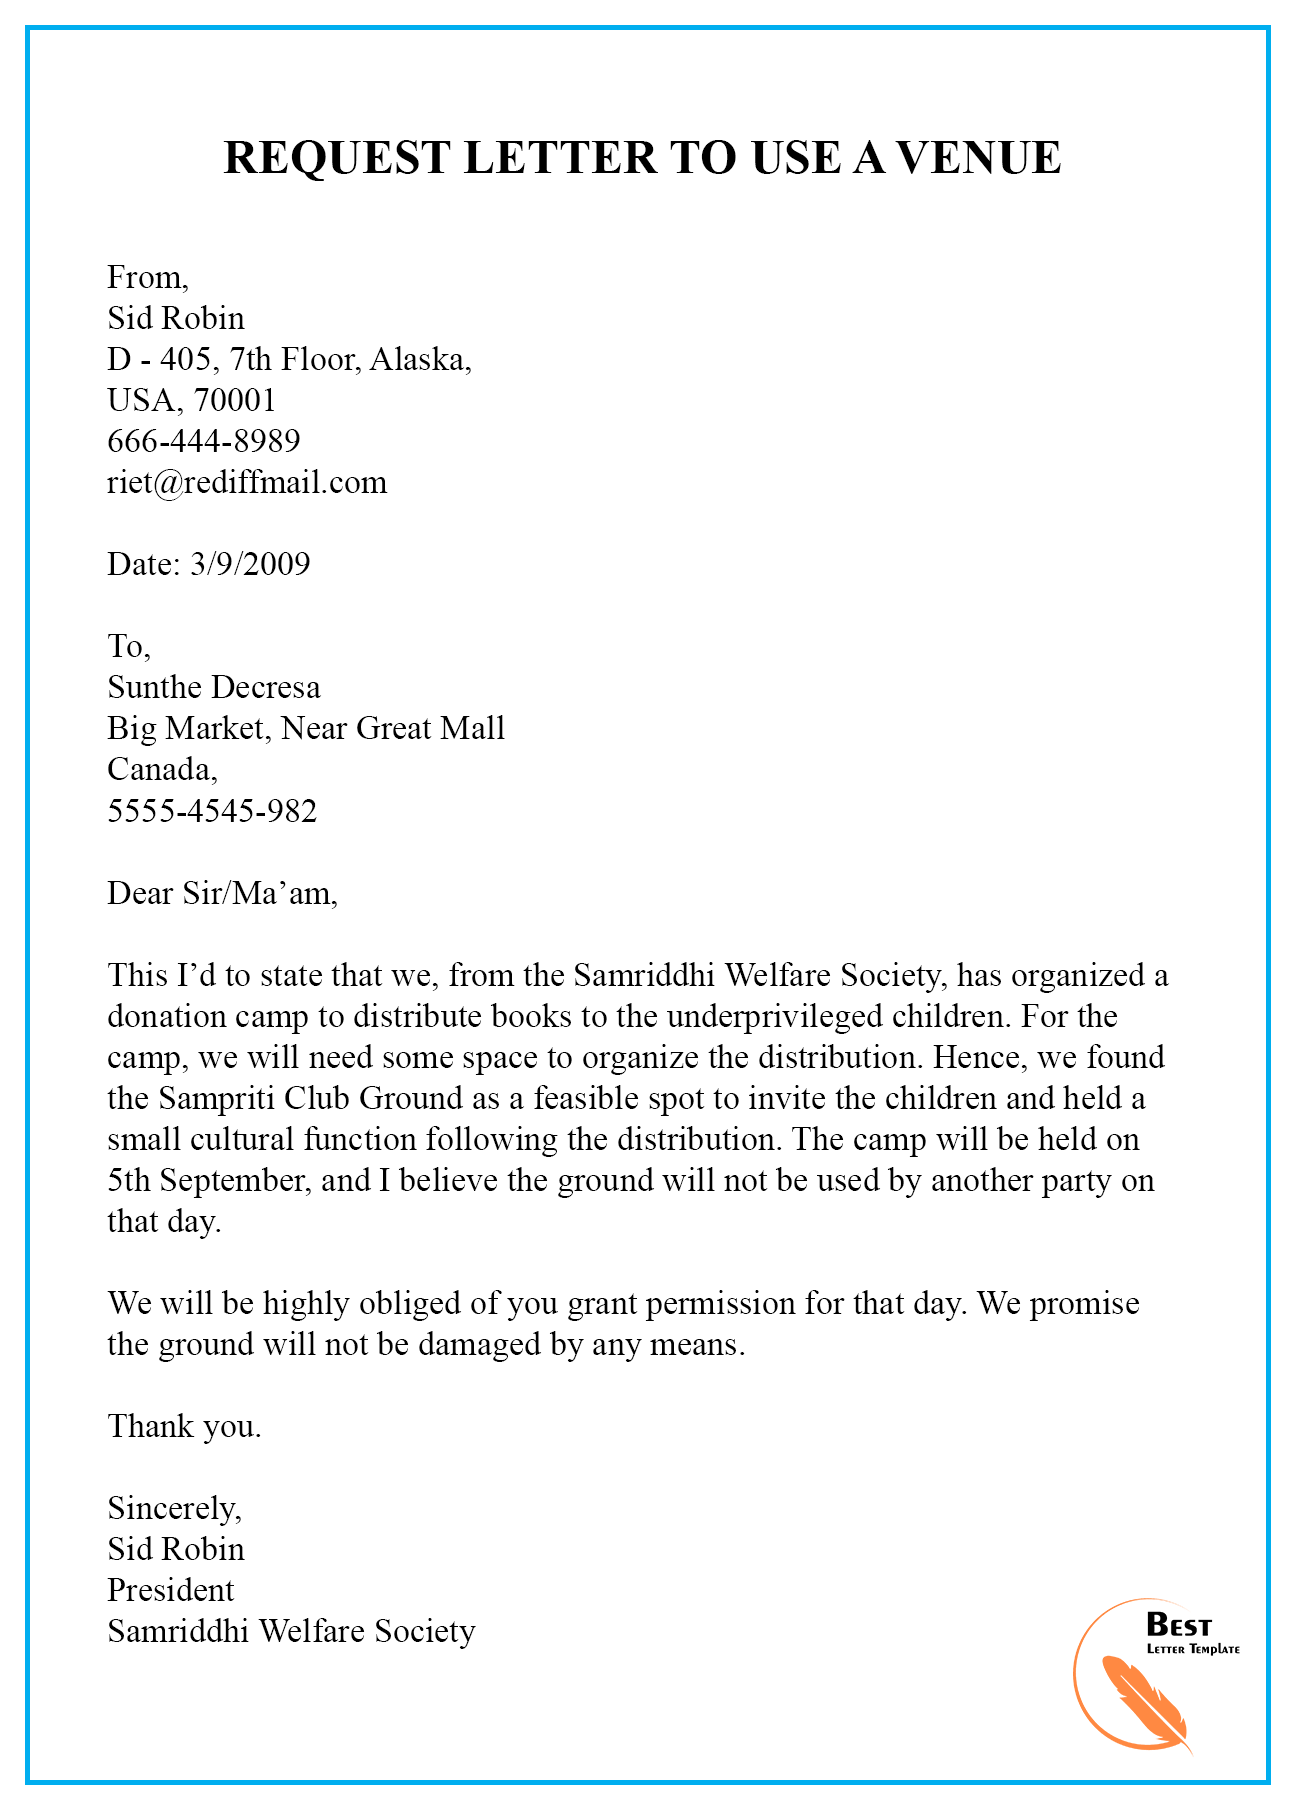 REQUEST LETTER FOR PERMISSION TO USE A VENUE